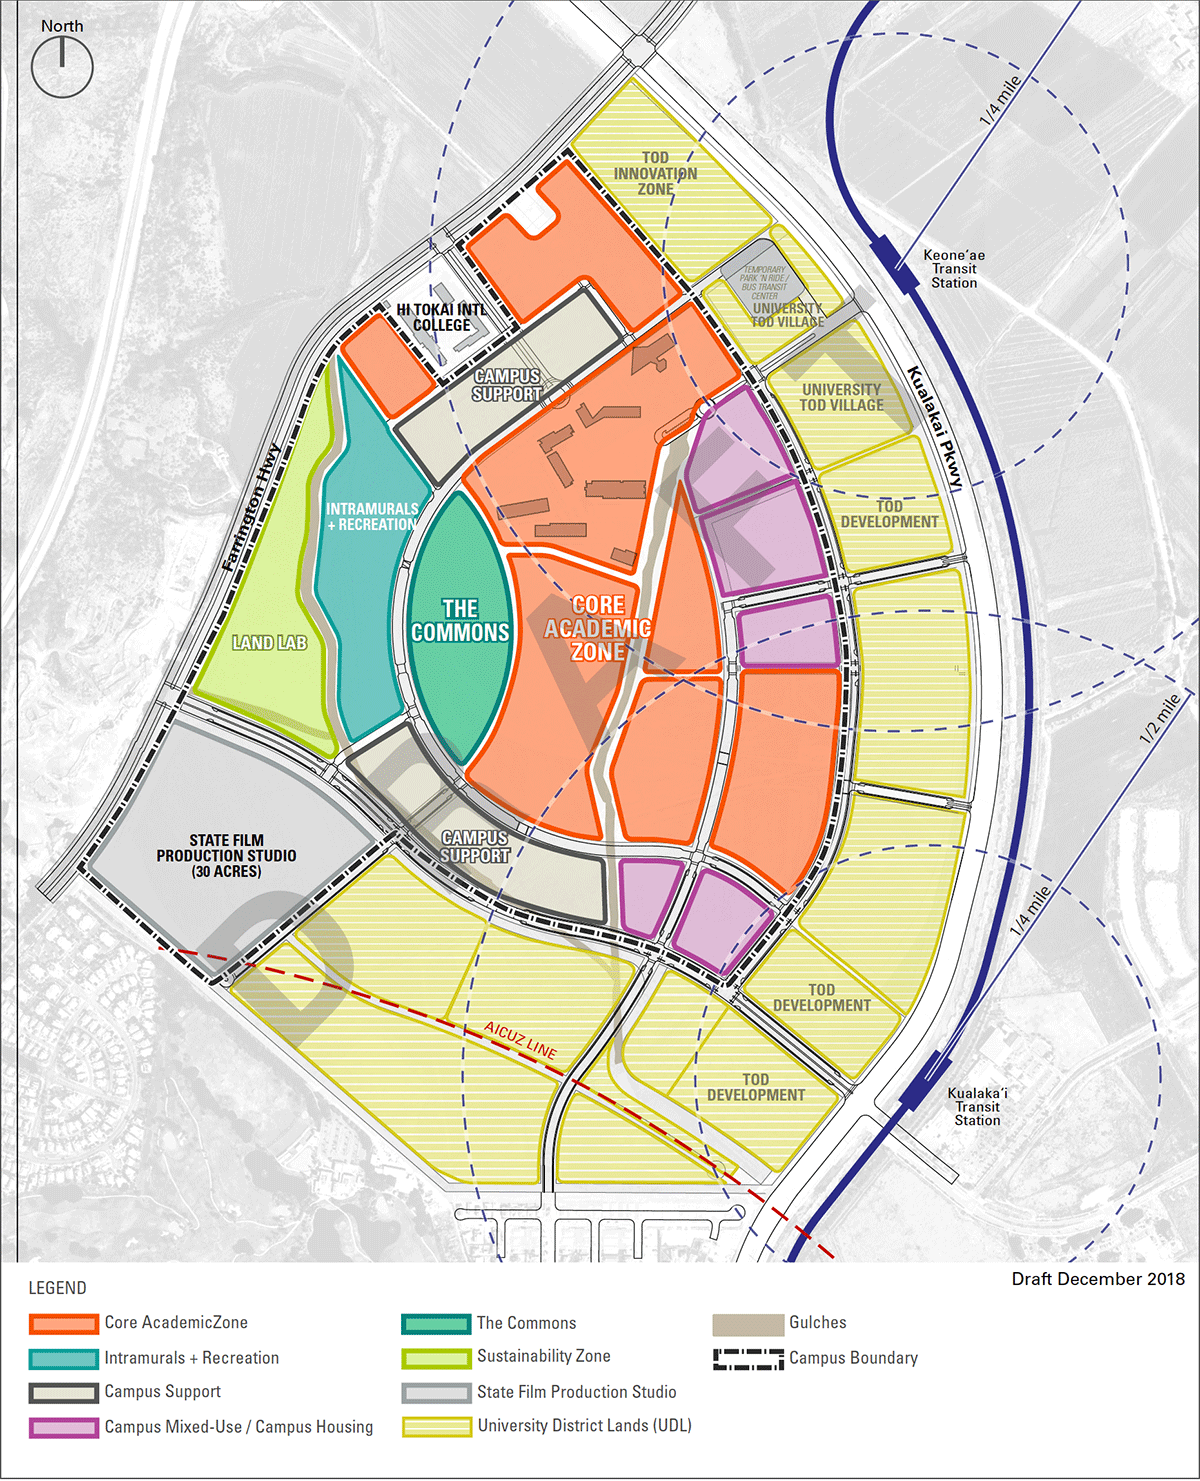 The University Makai Lands (approximately 500 acres) campus land plan – draft – is segmented by conceptual uses into zones for innovation, professional studies, professional and applied sciences, sustainability, core, and campus mixed use (including the commons, intramurals + recreation, and campus support). It also includes University District (University Transit Oriented Village, Transit Oriented Development, and the location of the proposed film studio.